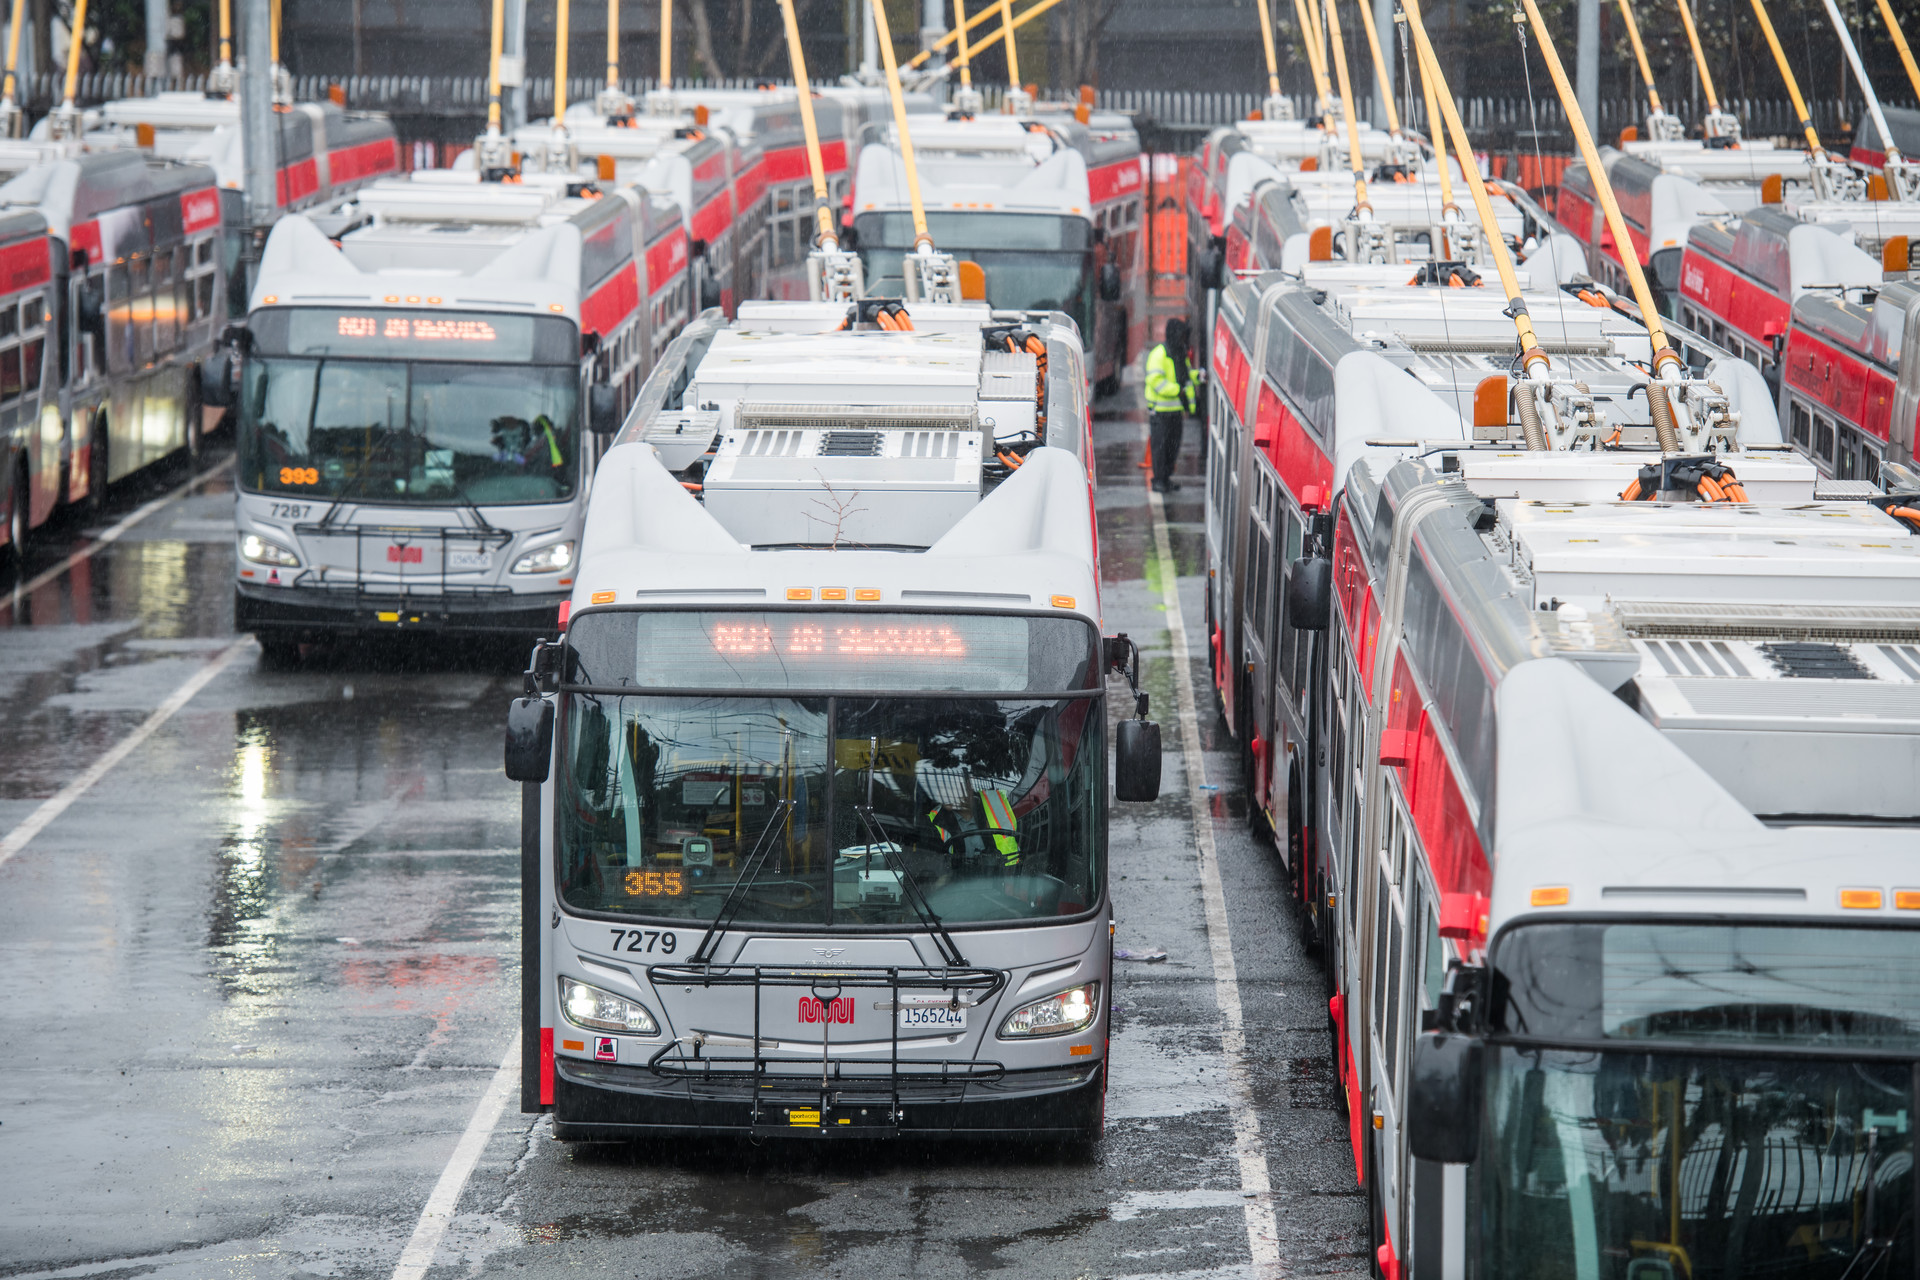 Muni buses parked in San Francisco. They are gray with a red stripe down the side of the bus. The road is wet from rain.